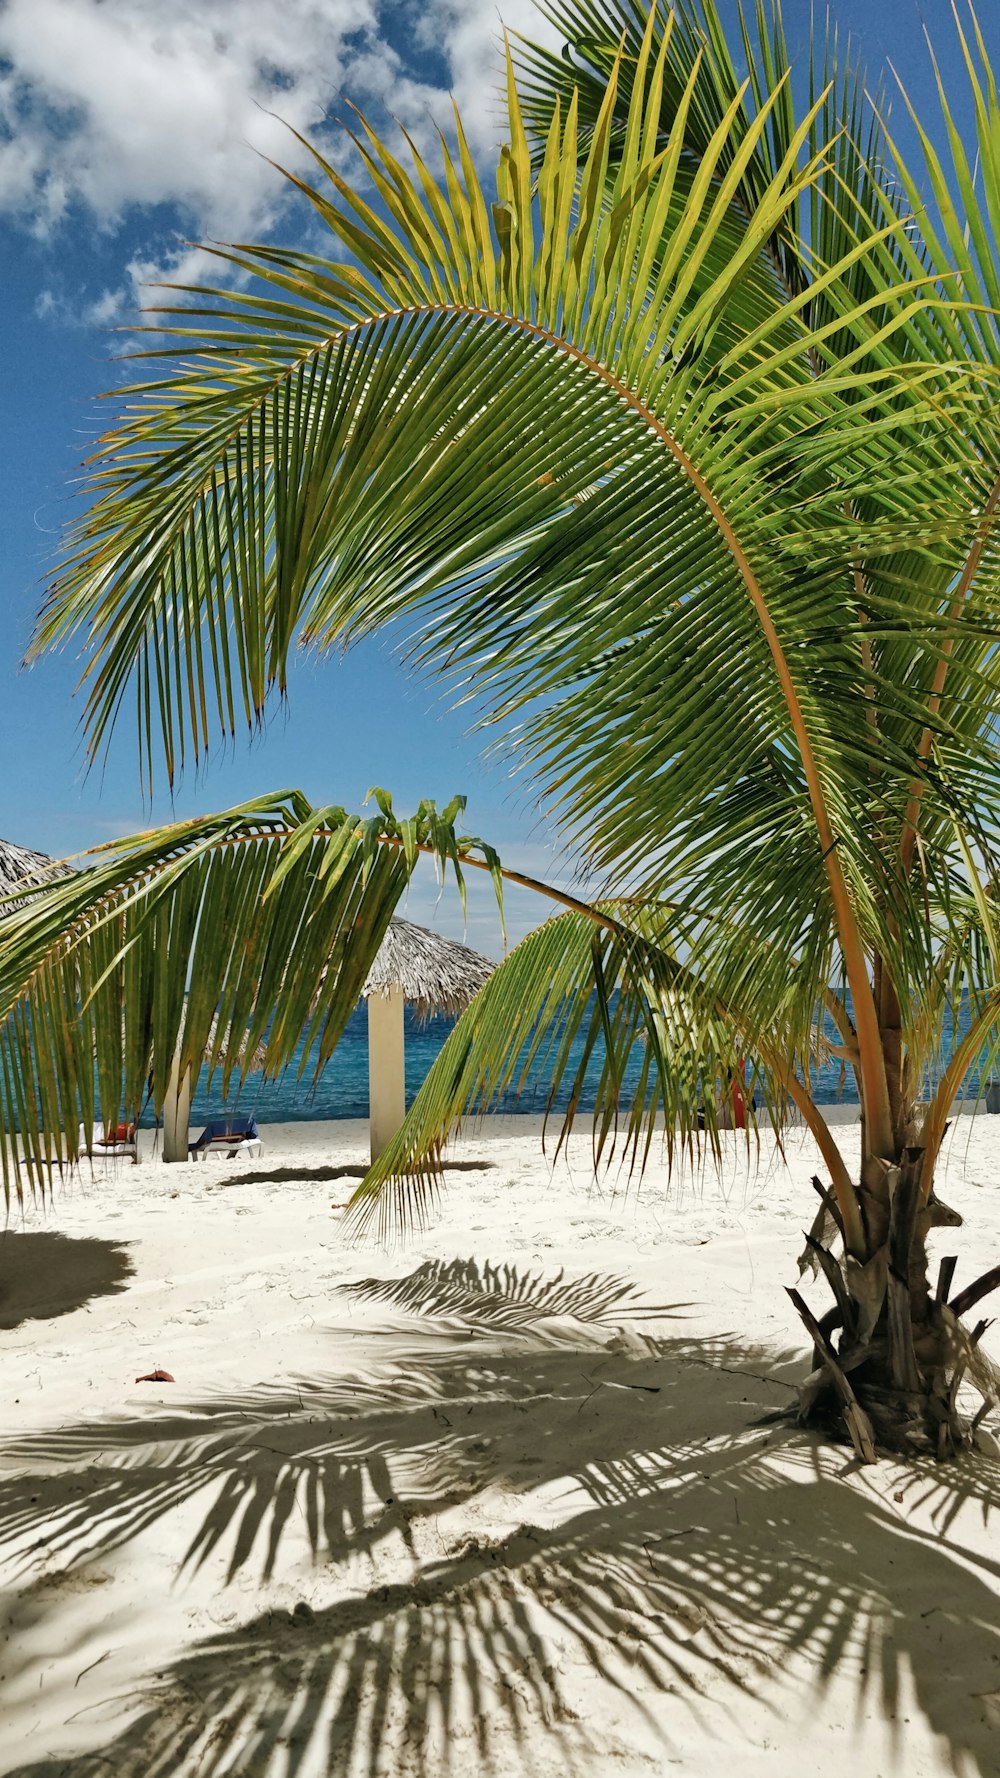 a palm tree on a sandy beach with the ocean in the background